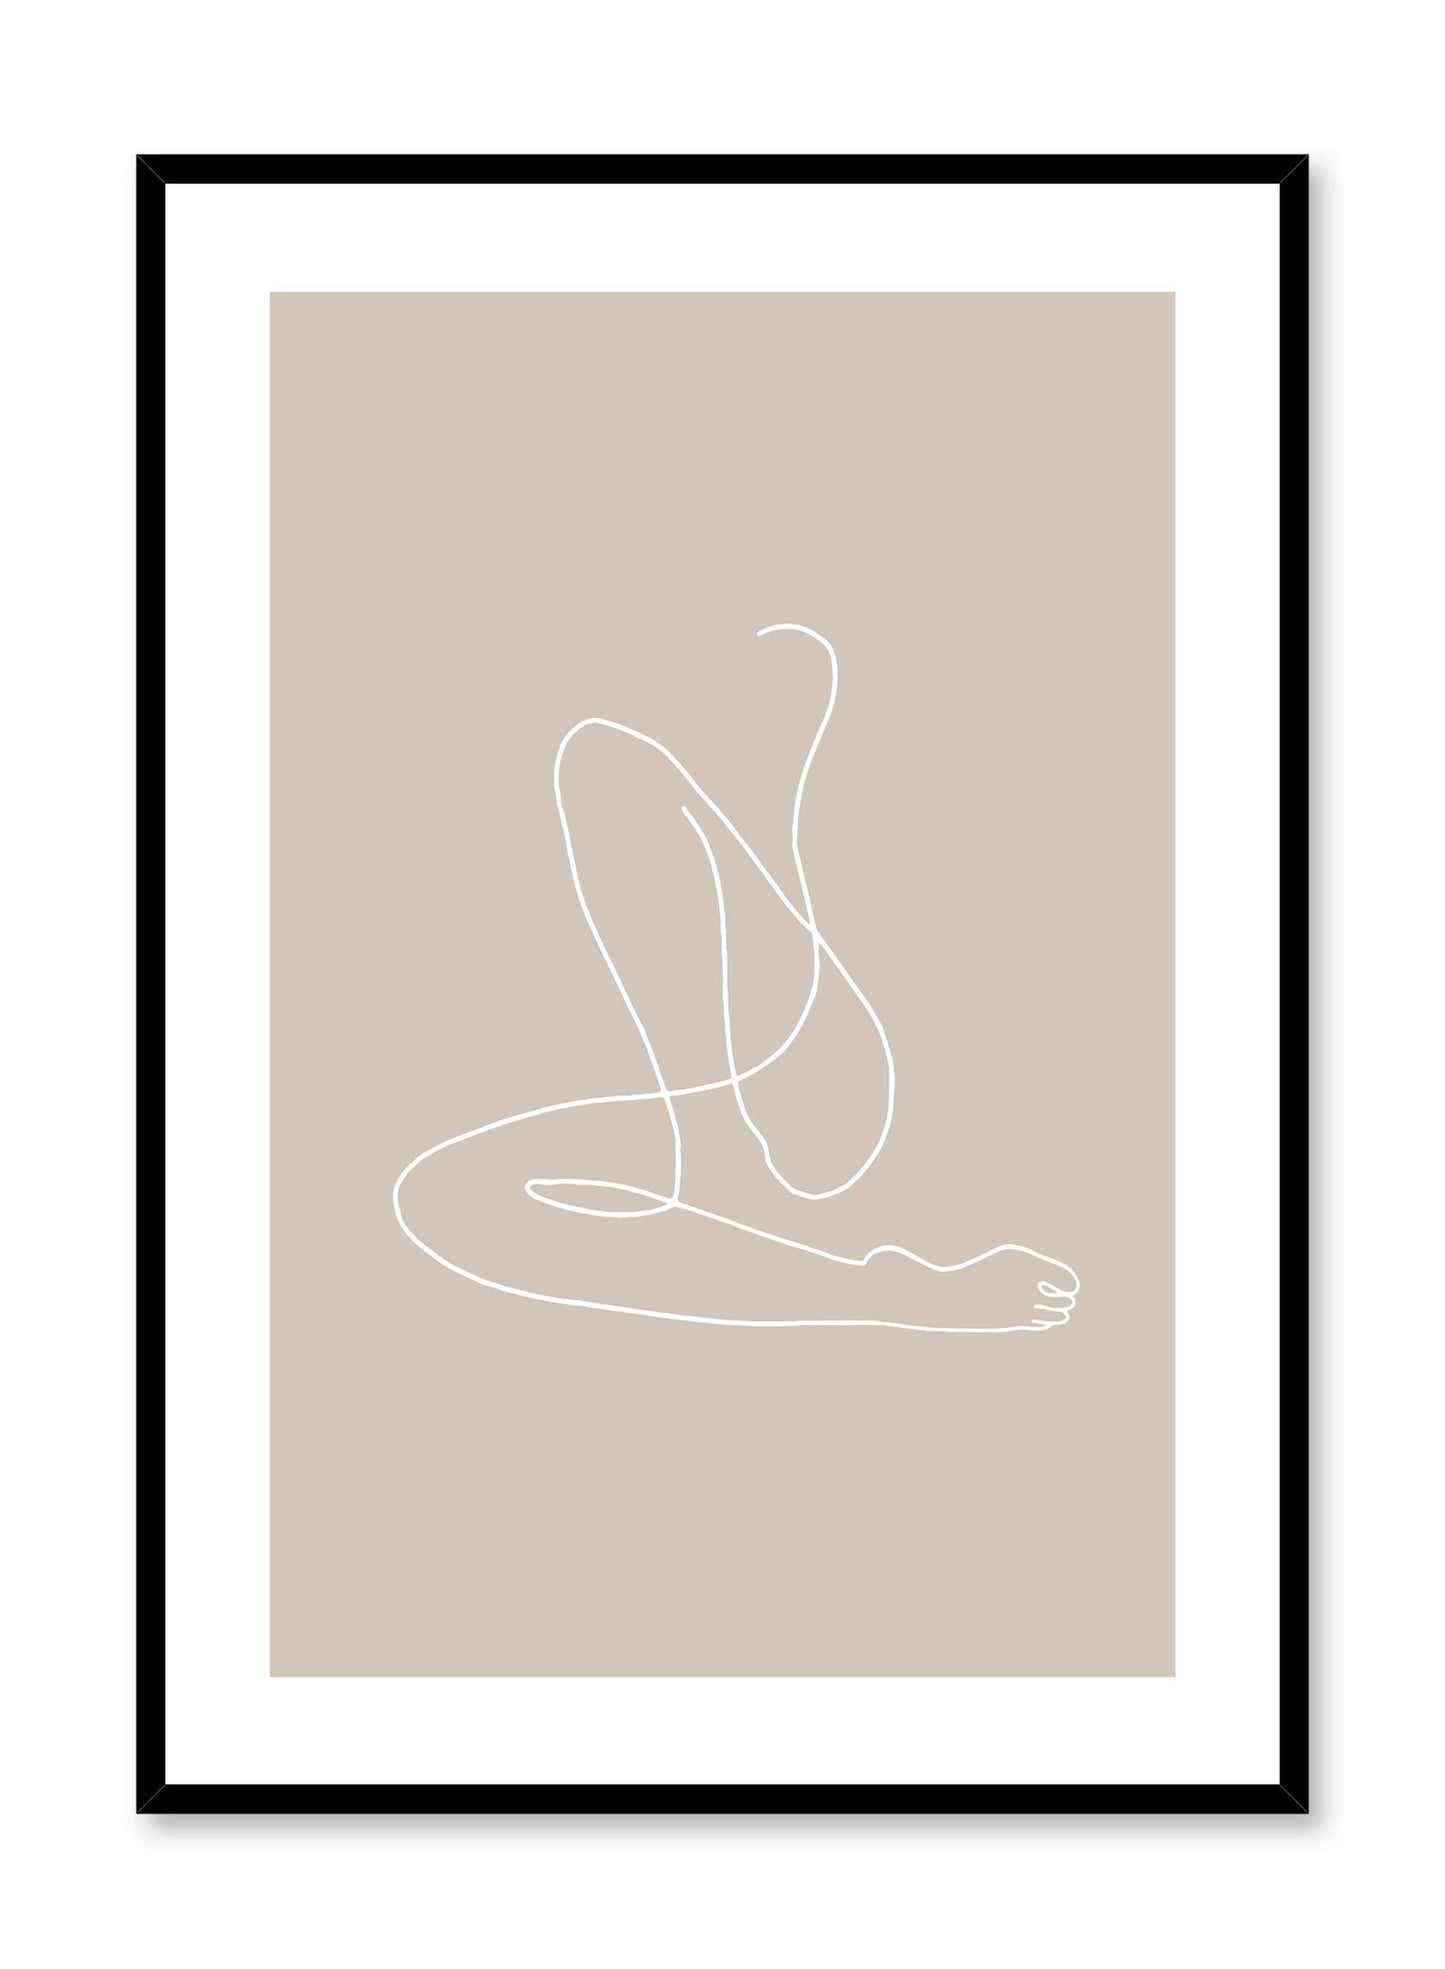 Modern minimalist poster by Opposite Wall with abstract illustration of Flow with beige background